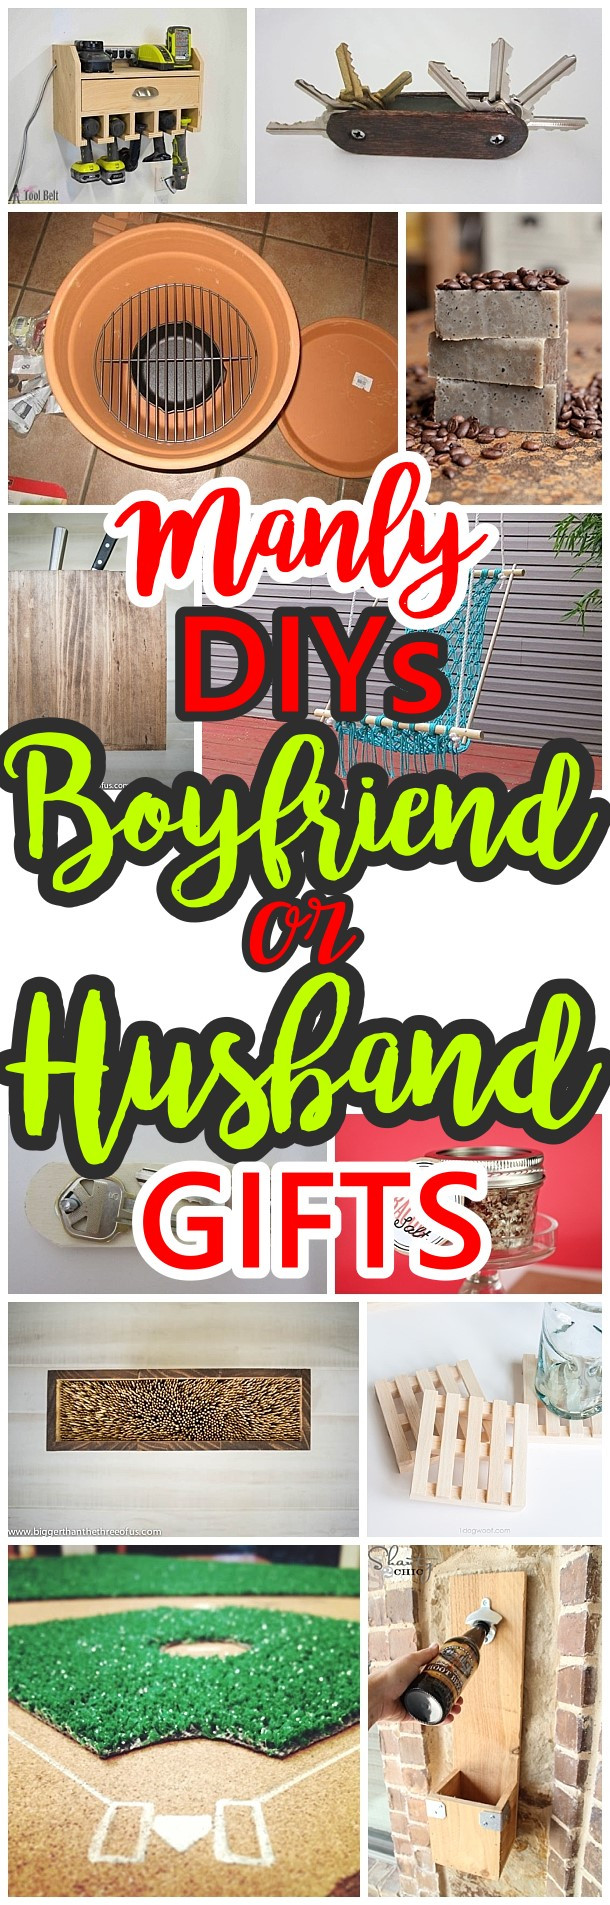 DIY Christmas Gift For Husband
 Manly Do It Yourself Boyfriend and Husband Gift Ideas